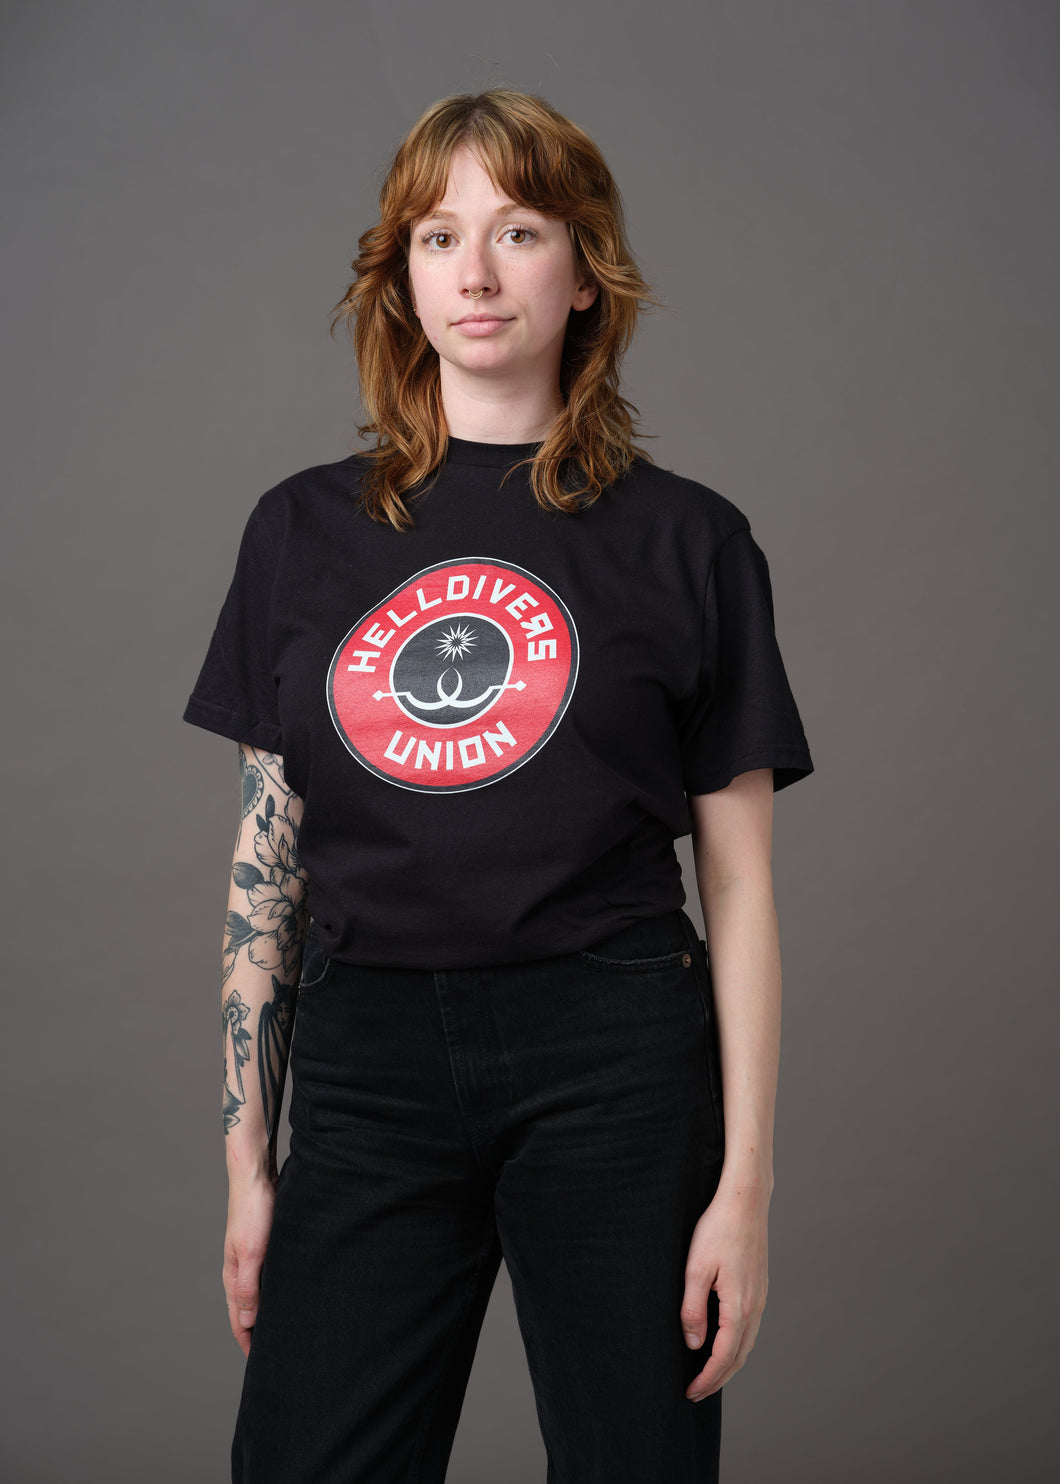 Black shirt with round black white and red design with two white sling blades and a white star surrounded by the words Helldivers Union